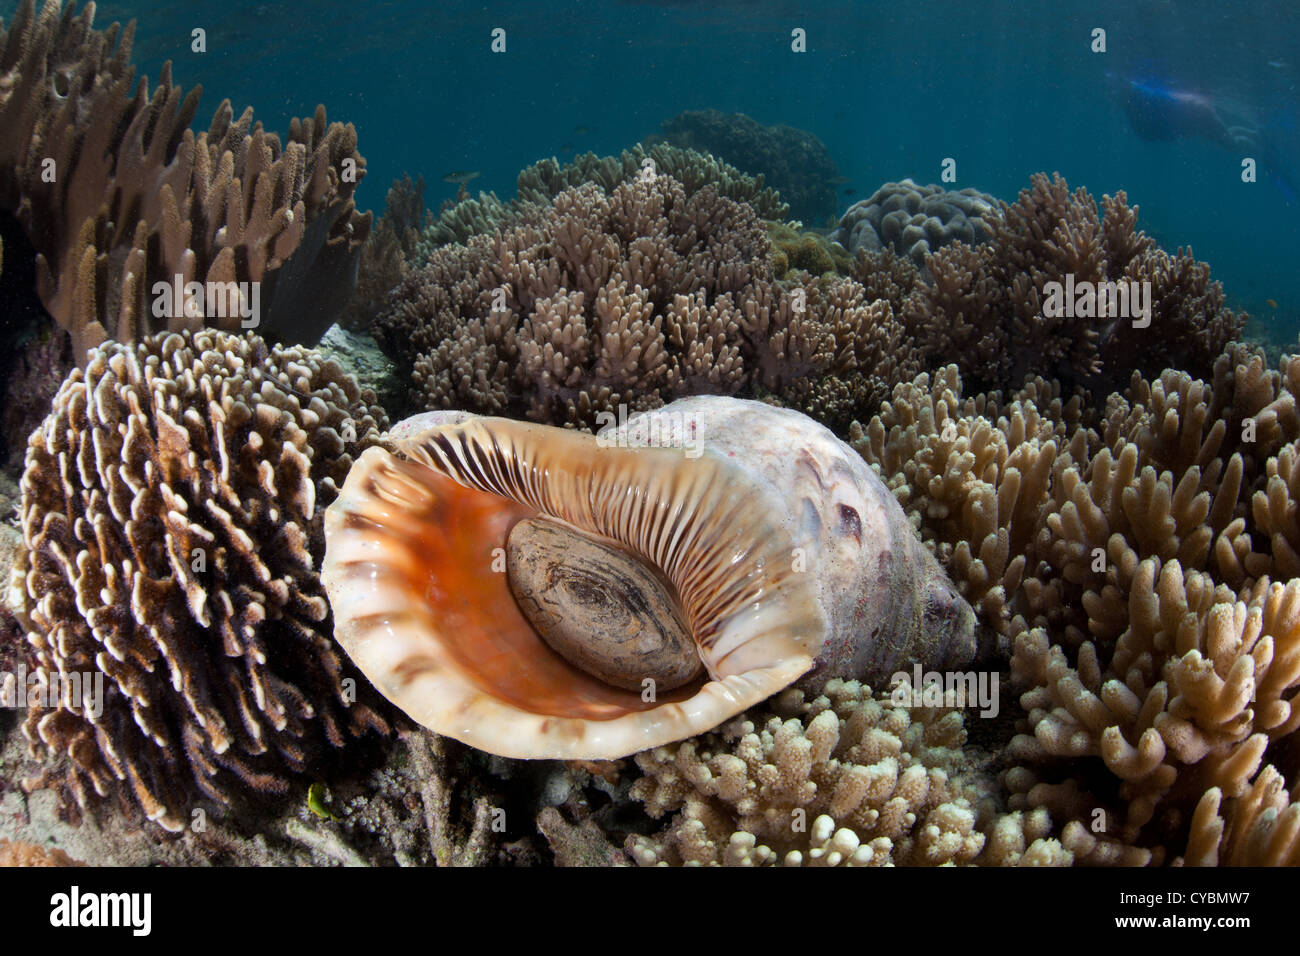 A giant Triton trumpet shell (Charonia tritonis) sits on a shallow coral reef in the western Pacific Ocean where it is native. Stock Photo